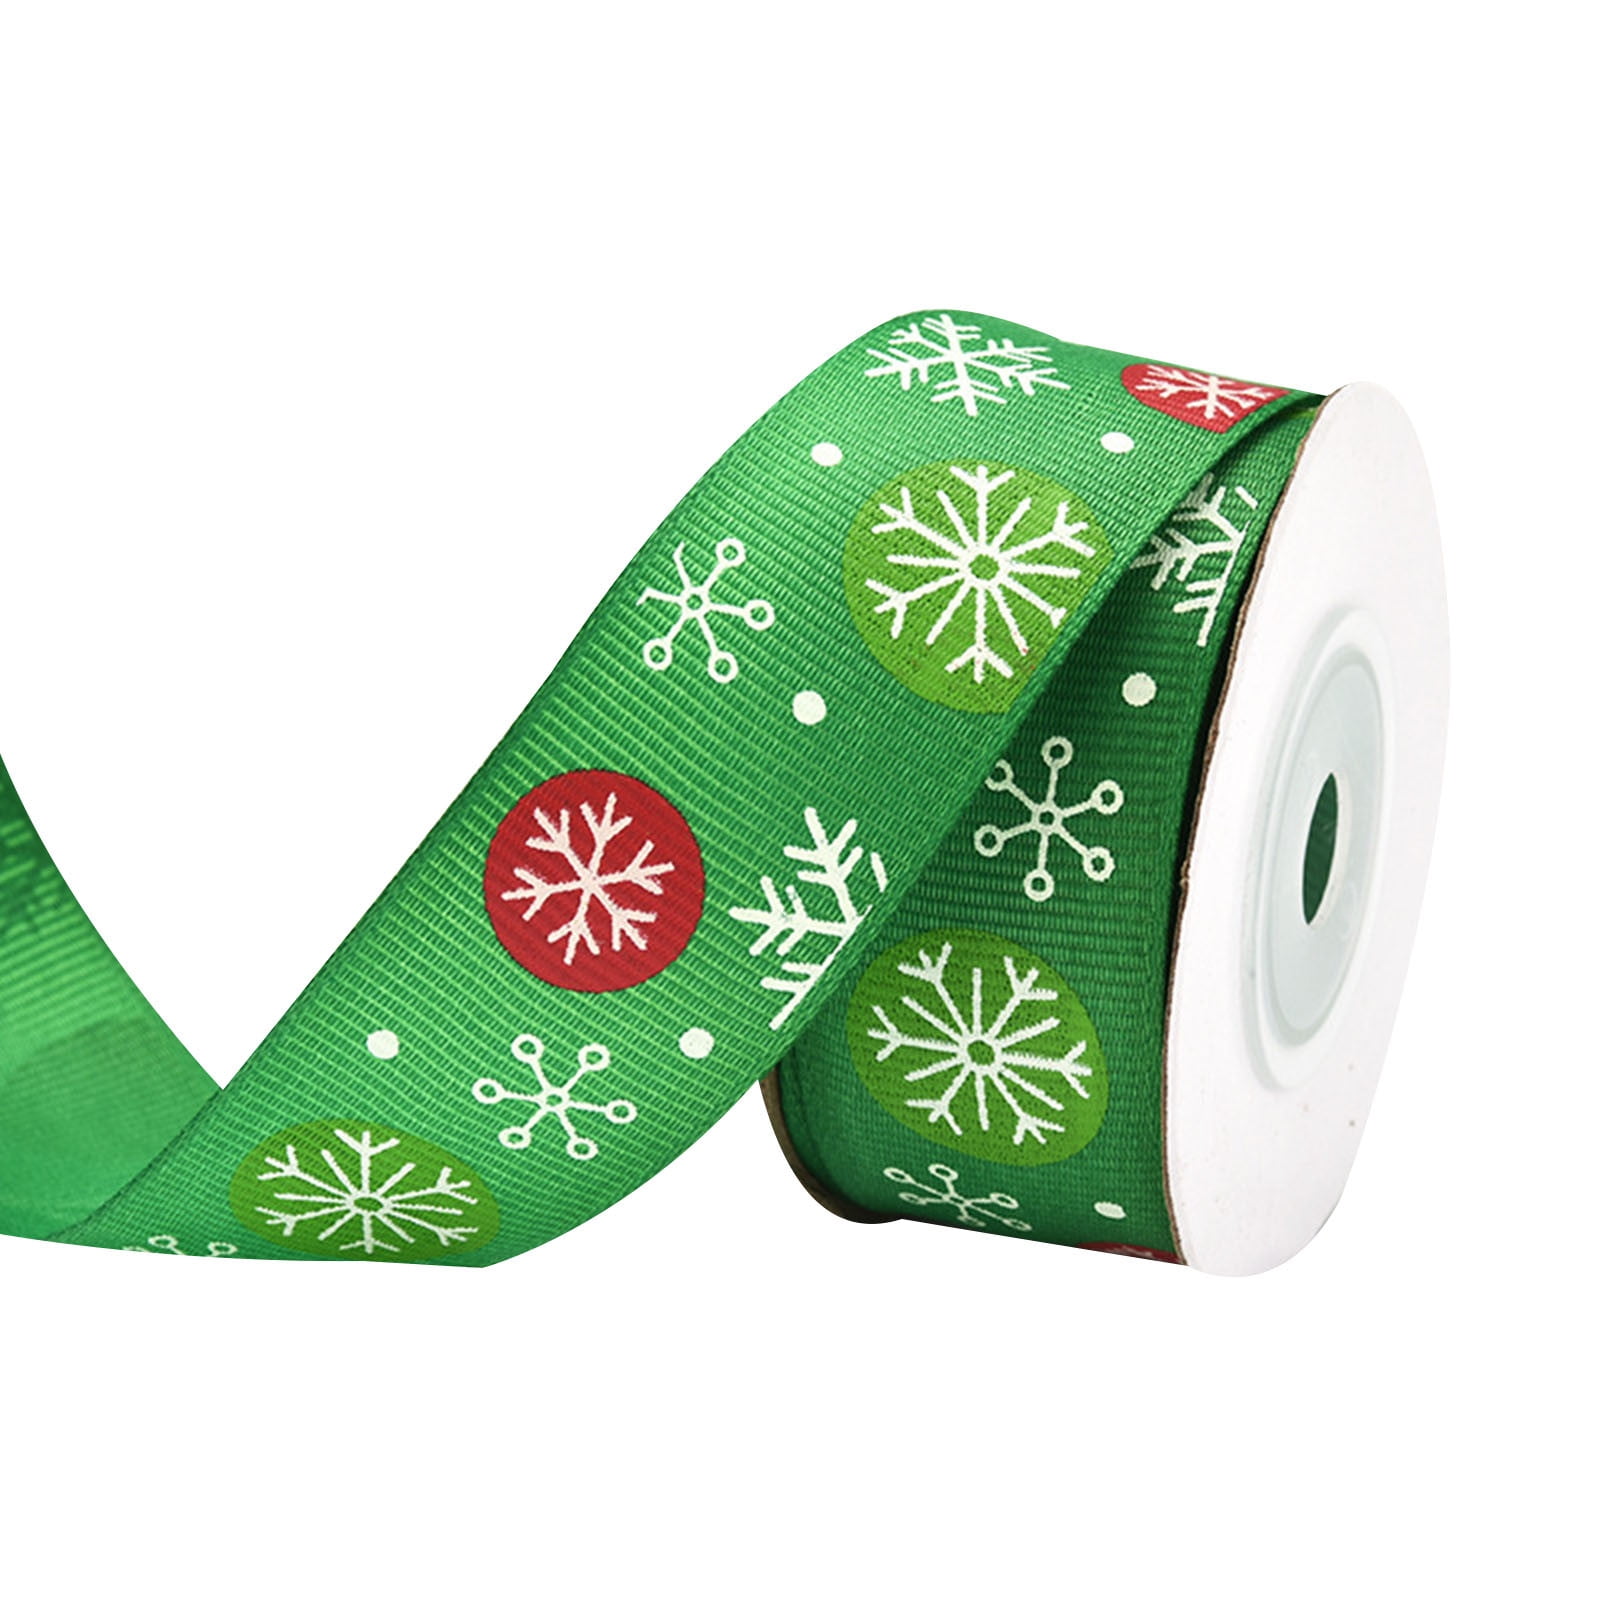  27 Styles Christmas Ribbon Xmas Grosgrain Ribbon Wrapping Ribbon  for Holiday Hair Bows Gift Wrapping, 0.4 Inches, 1 Inches and 1.5 Inches :  Health & Household